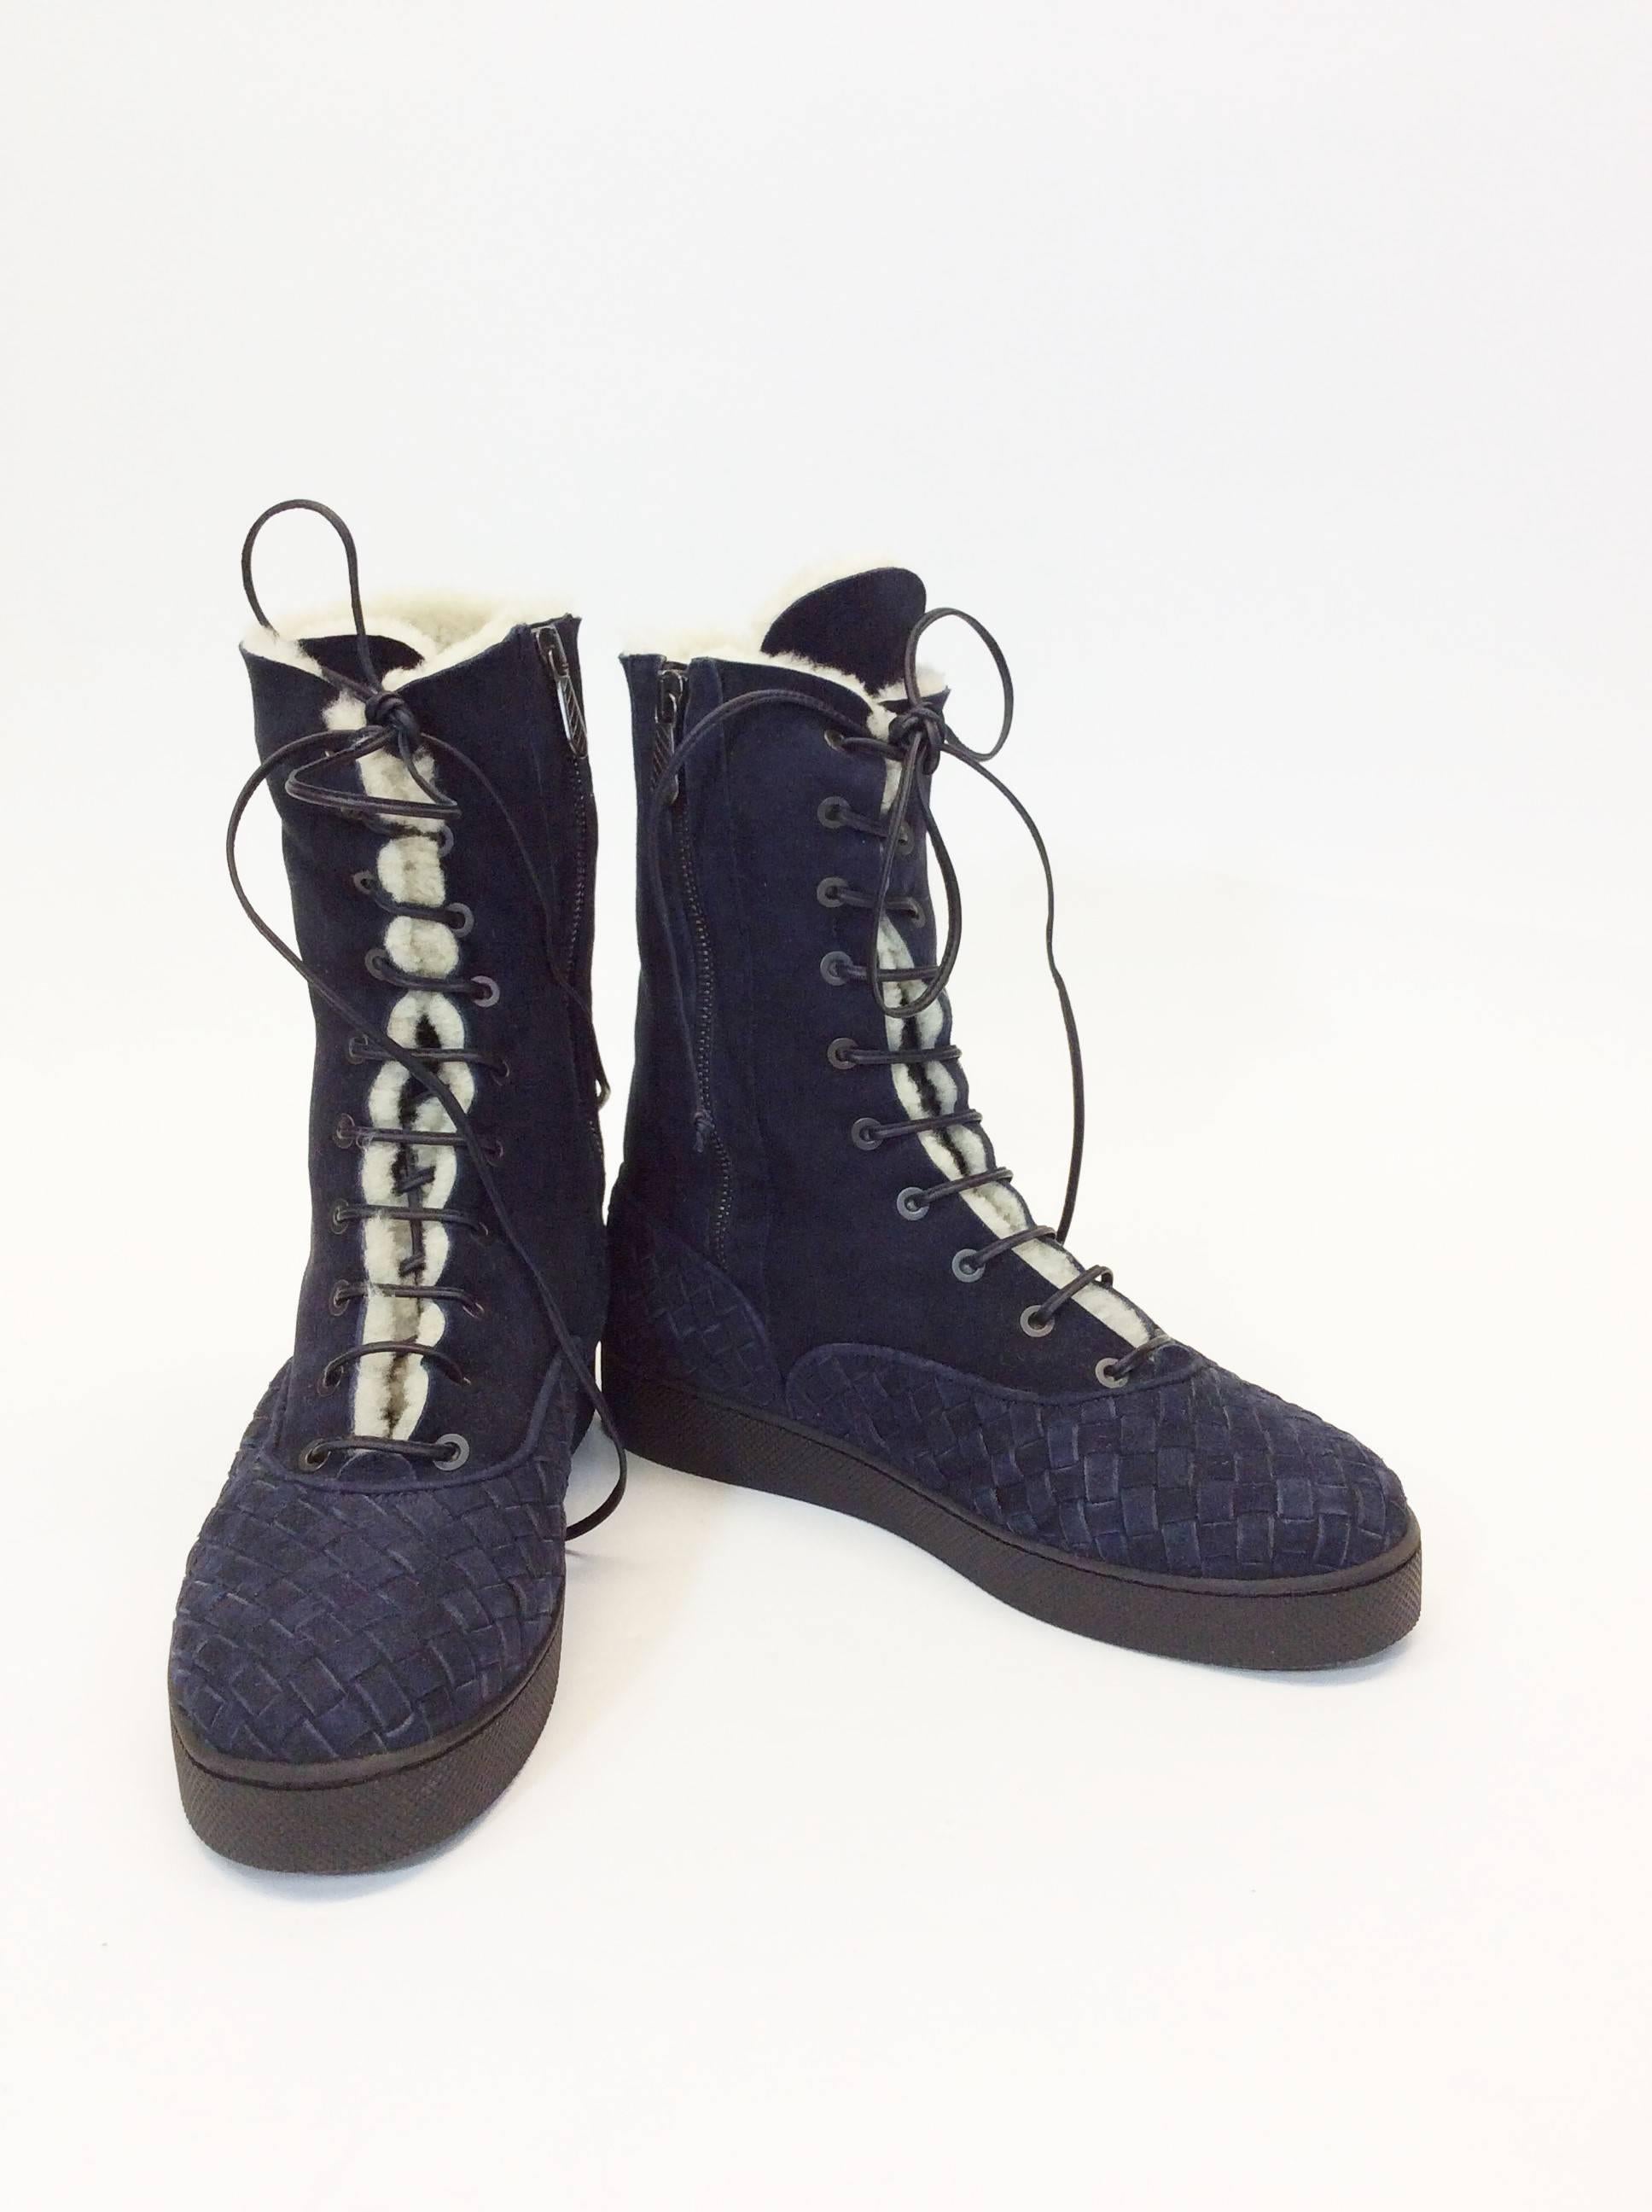 Sheep Skin Interior for Warmth
Navy Blue Suede 
Woven design around Ankle and Toe
Lace up Front and Side Zipper
3.5" Inch Sole 1" Inch Platform
UK Size 38 Equates to US 7.5